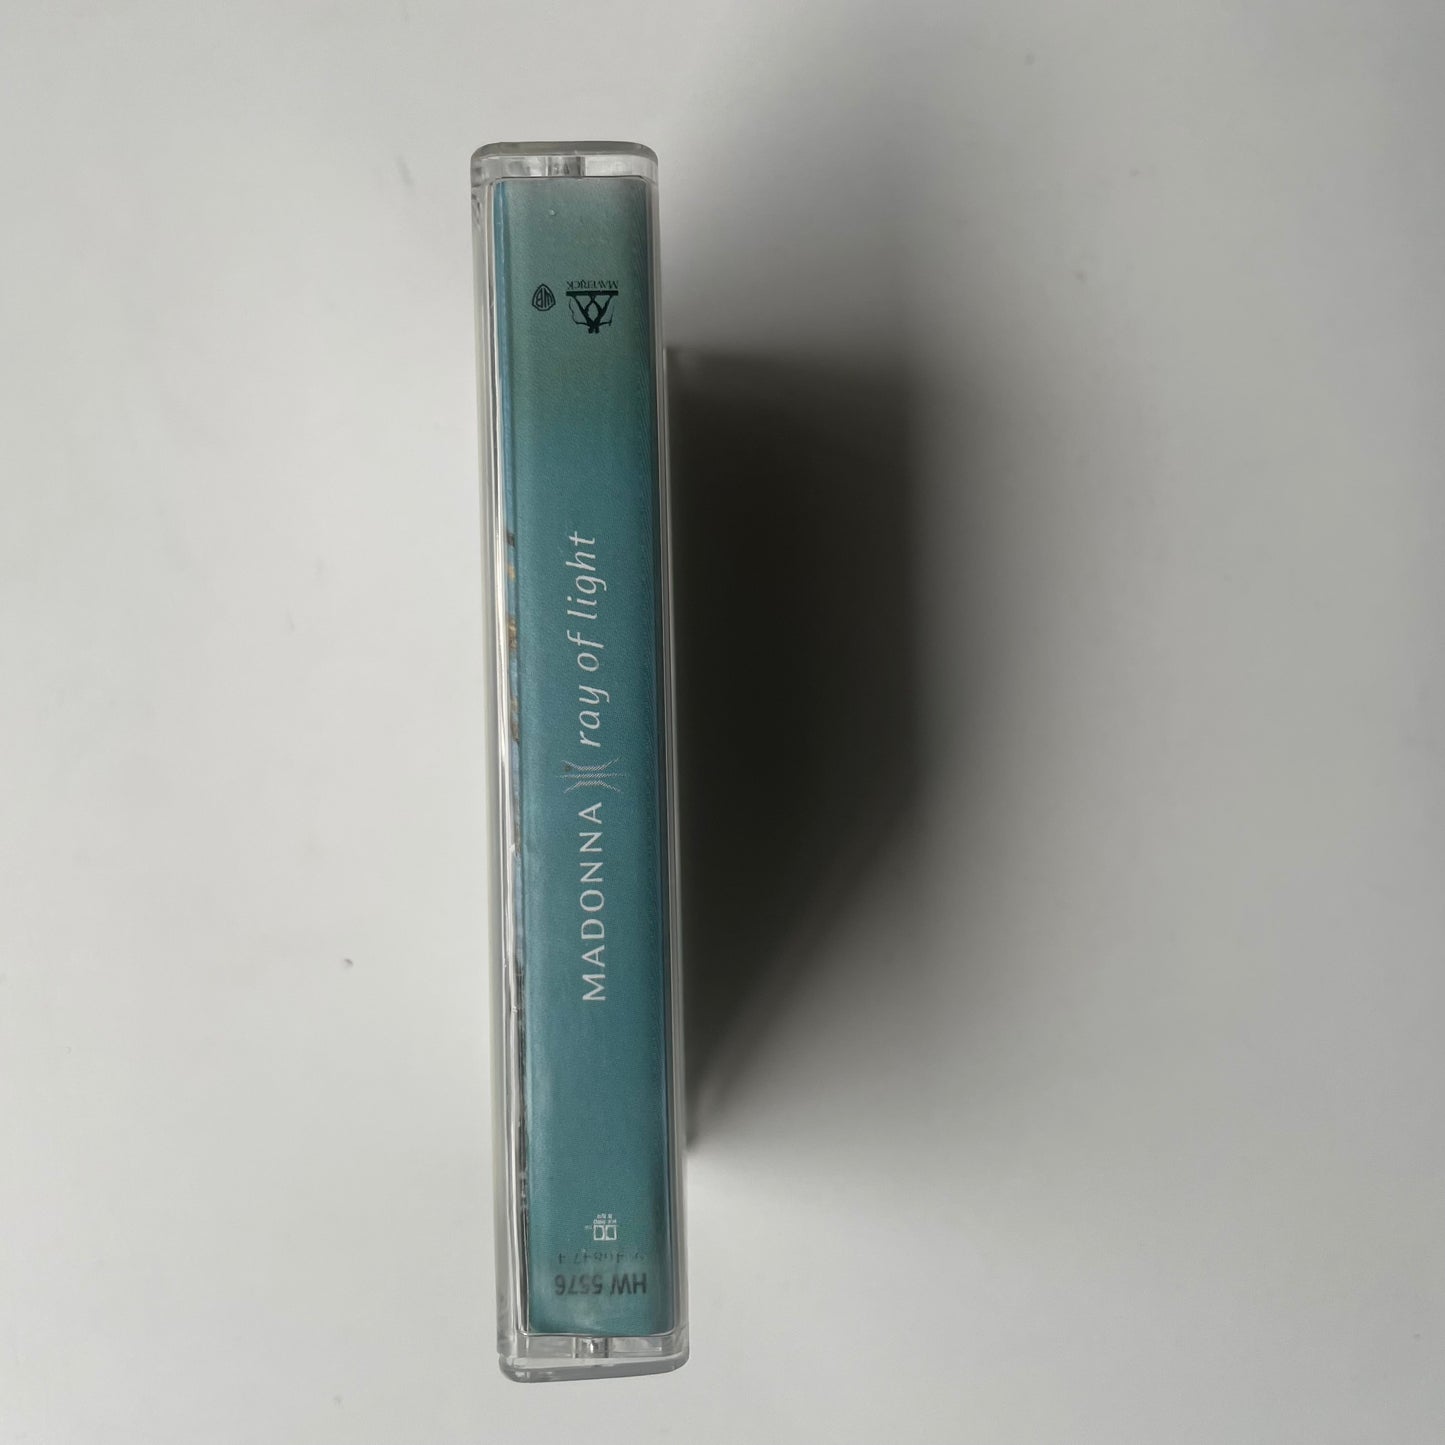 Tape Cassette Madonna Ray of Light 1998 title